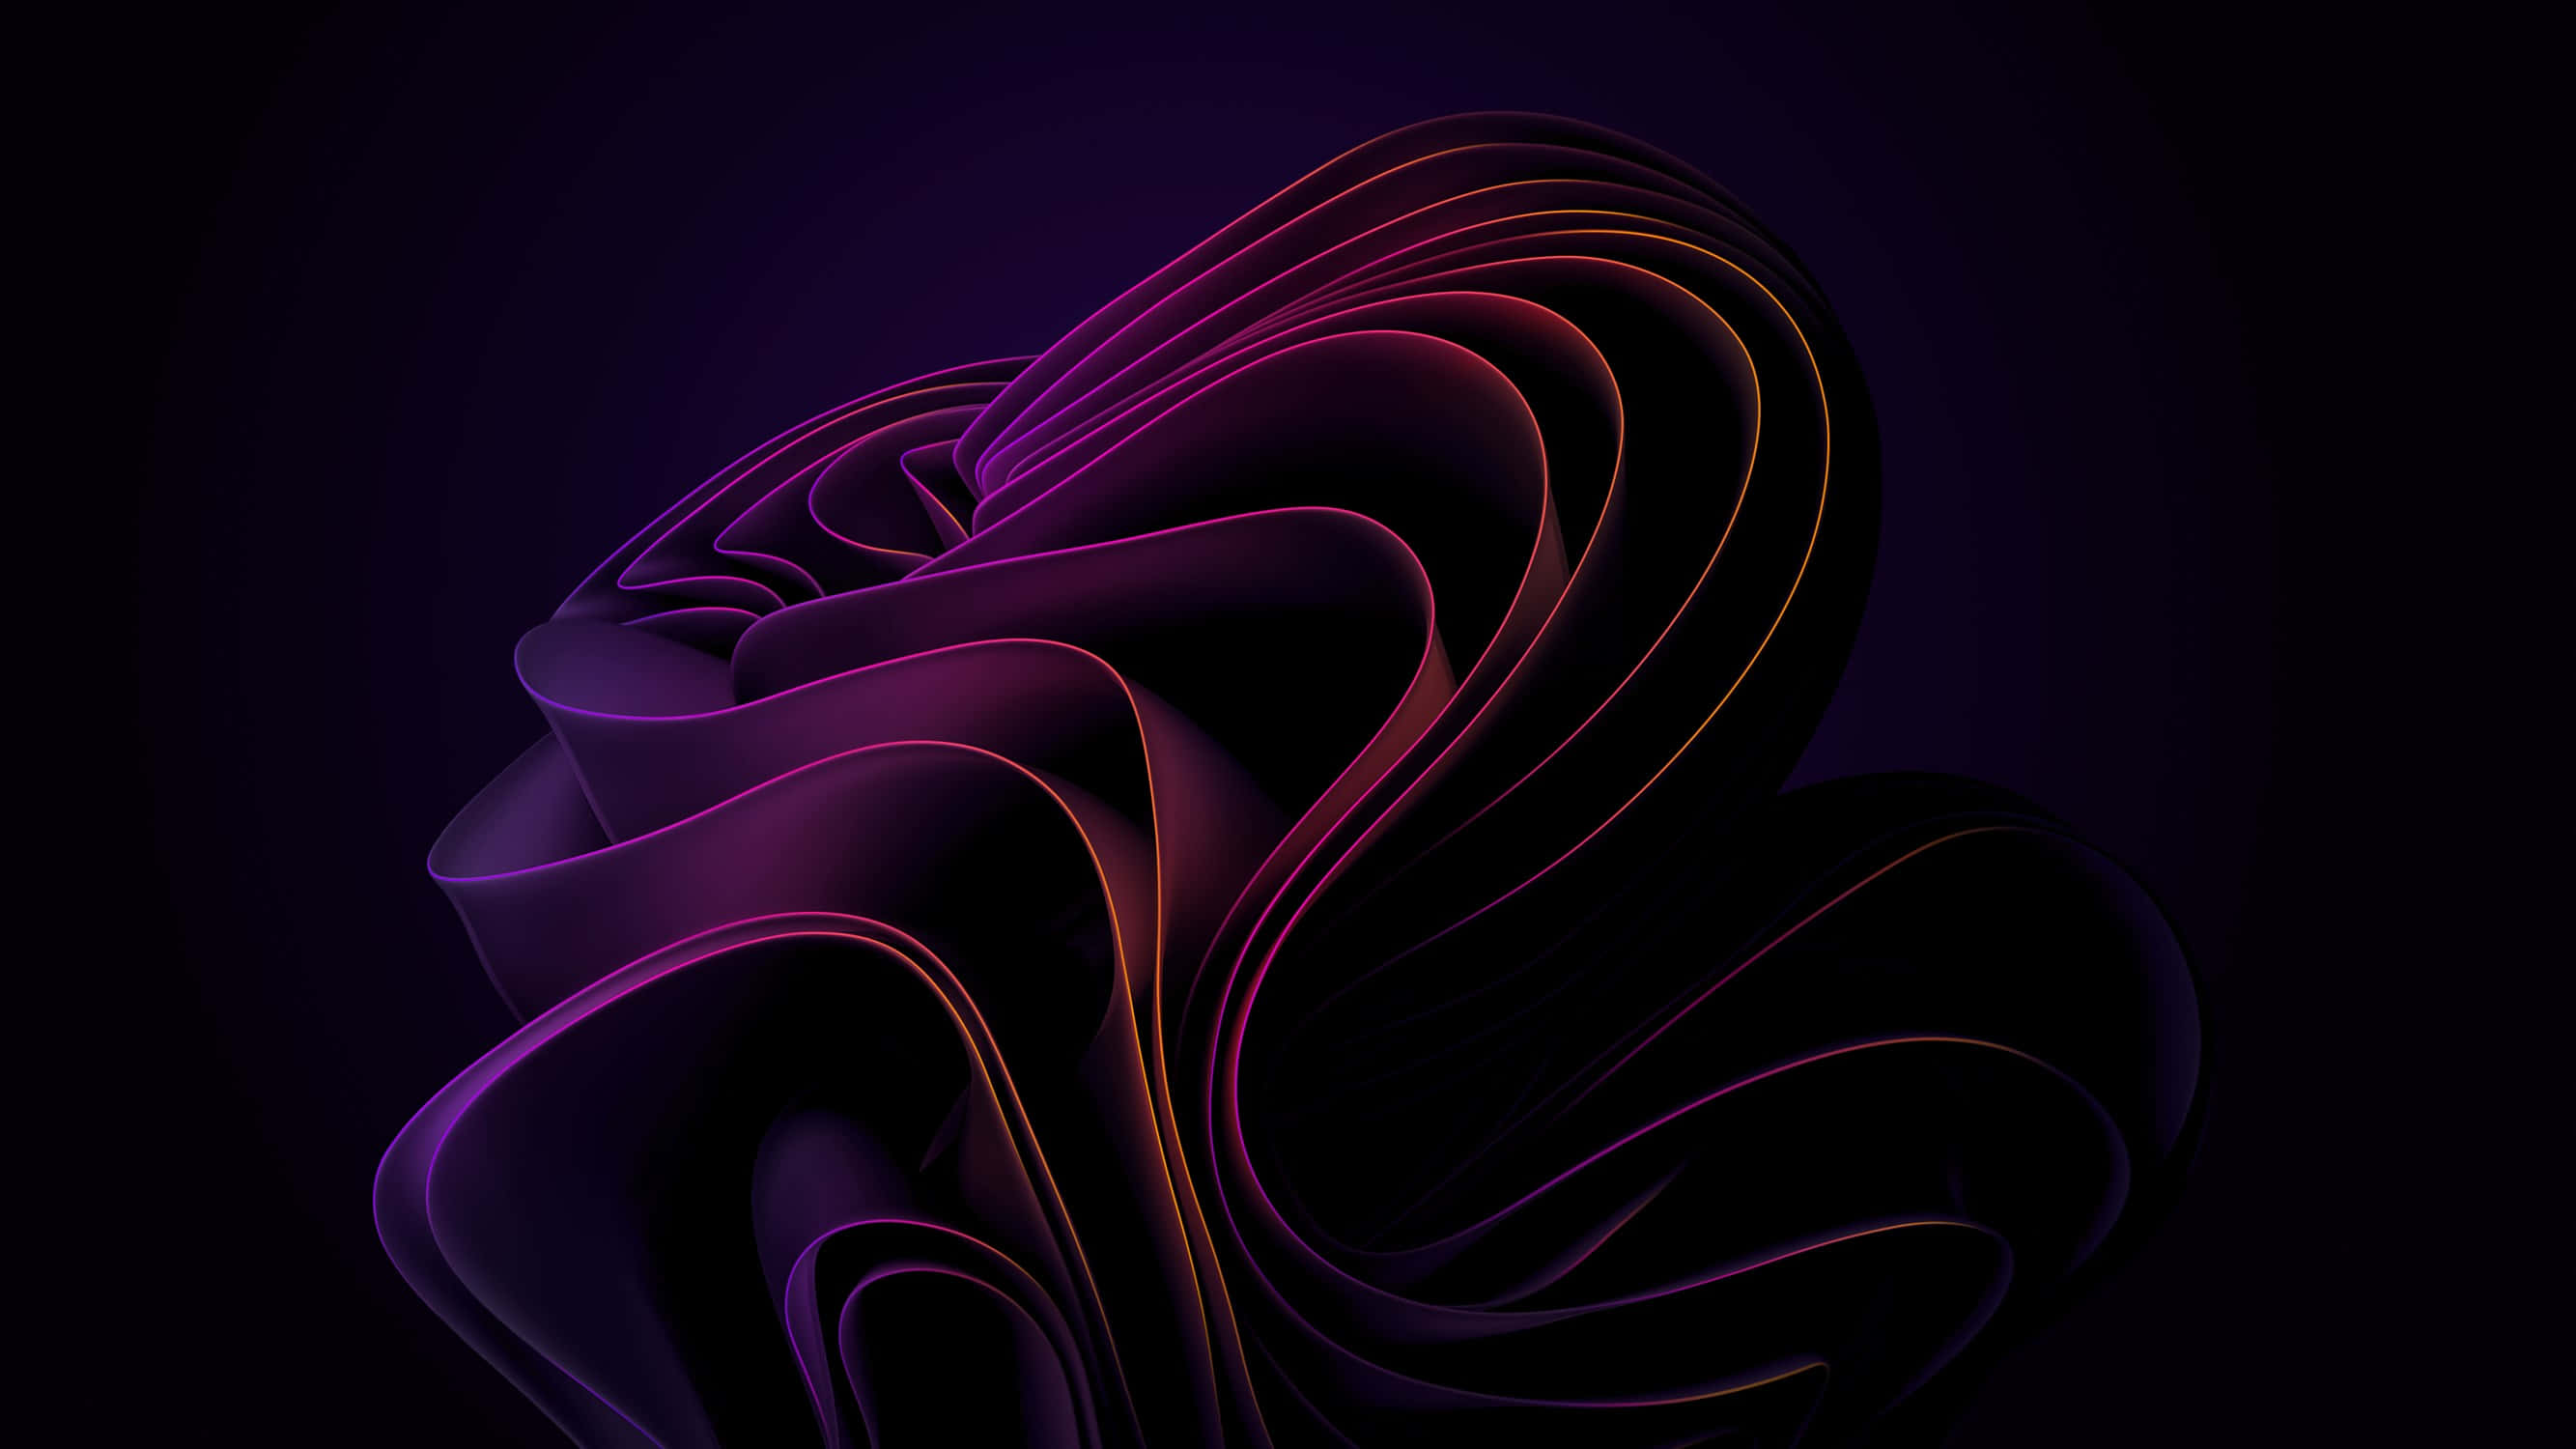 Abstract Art in Purple and Blue Wallpaper